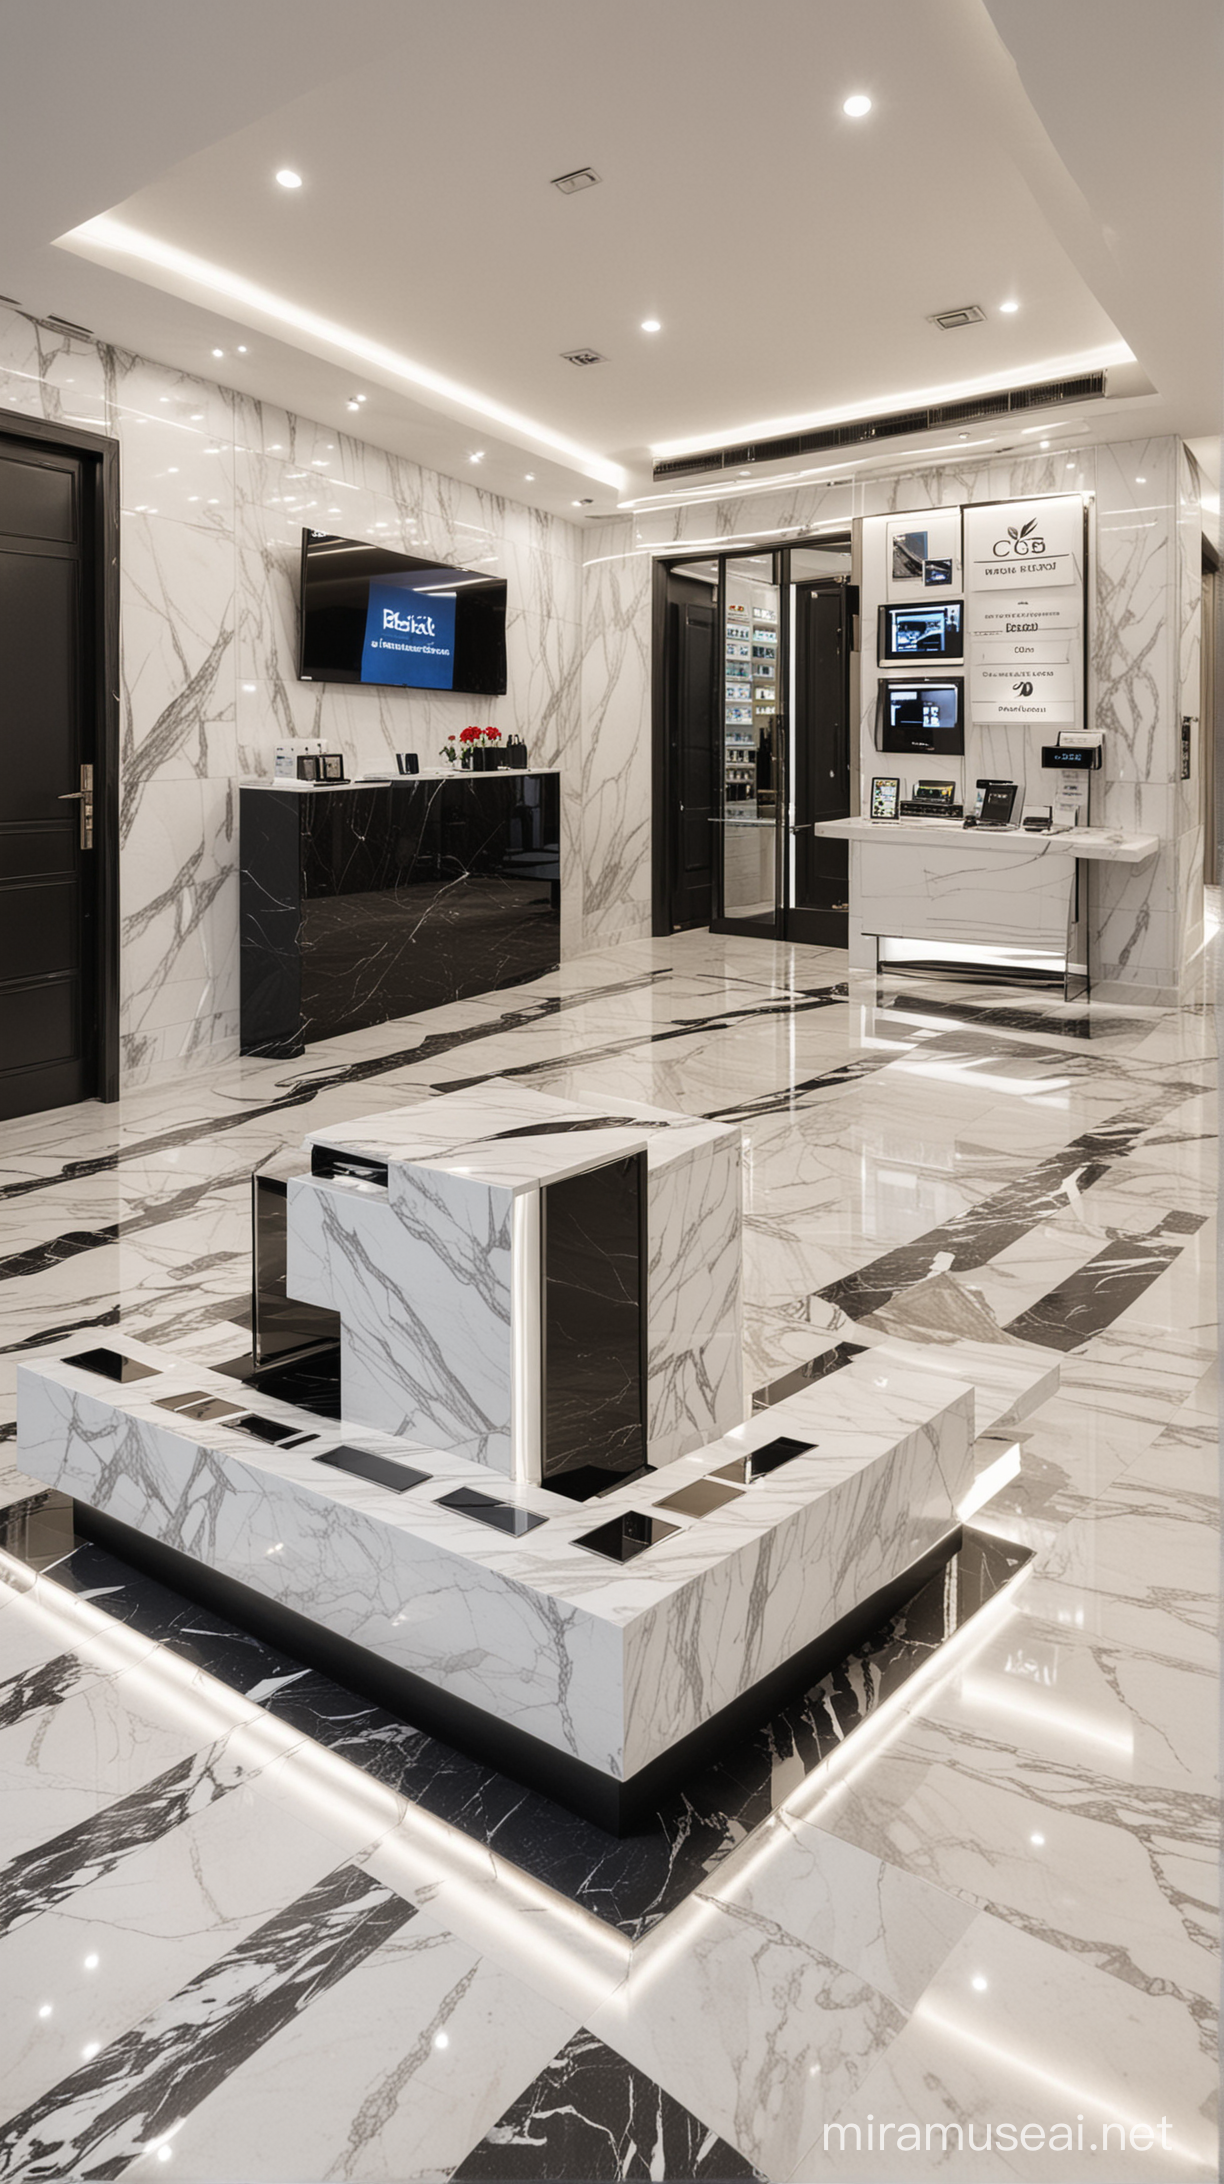 money transfer shop,cellphone,ultra modern design,floor,marble white and black , special reception